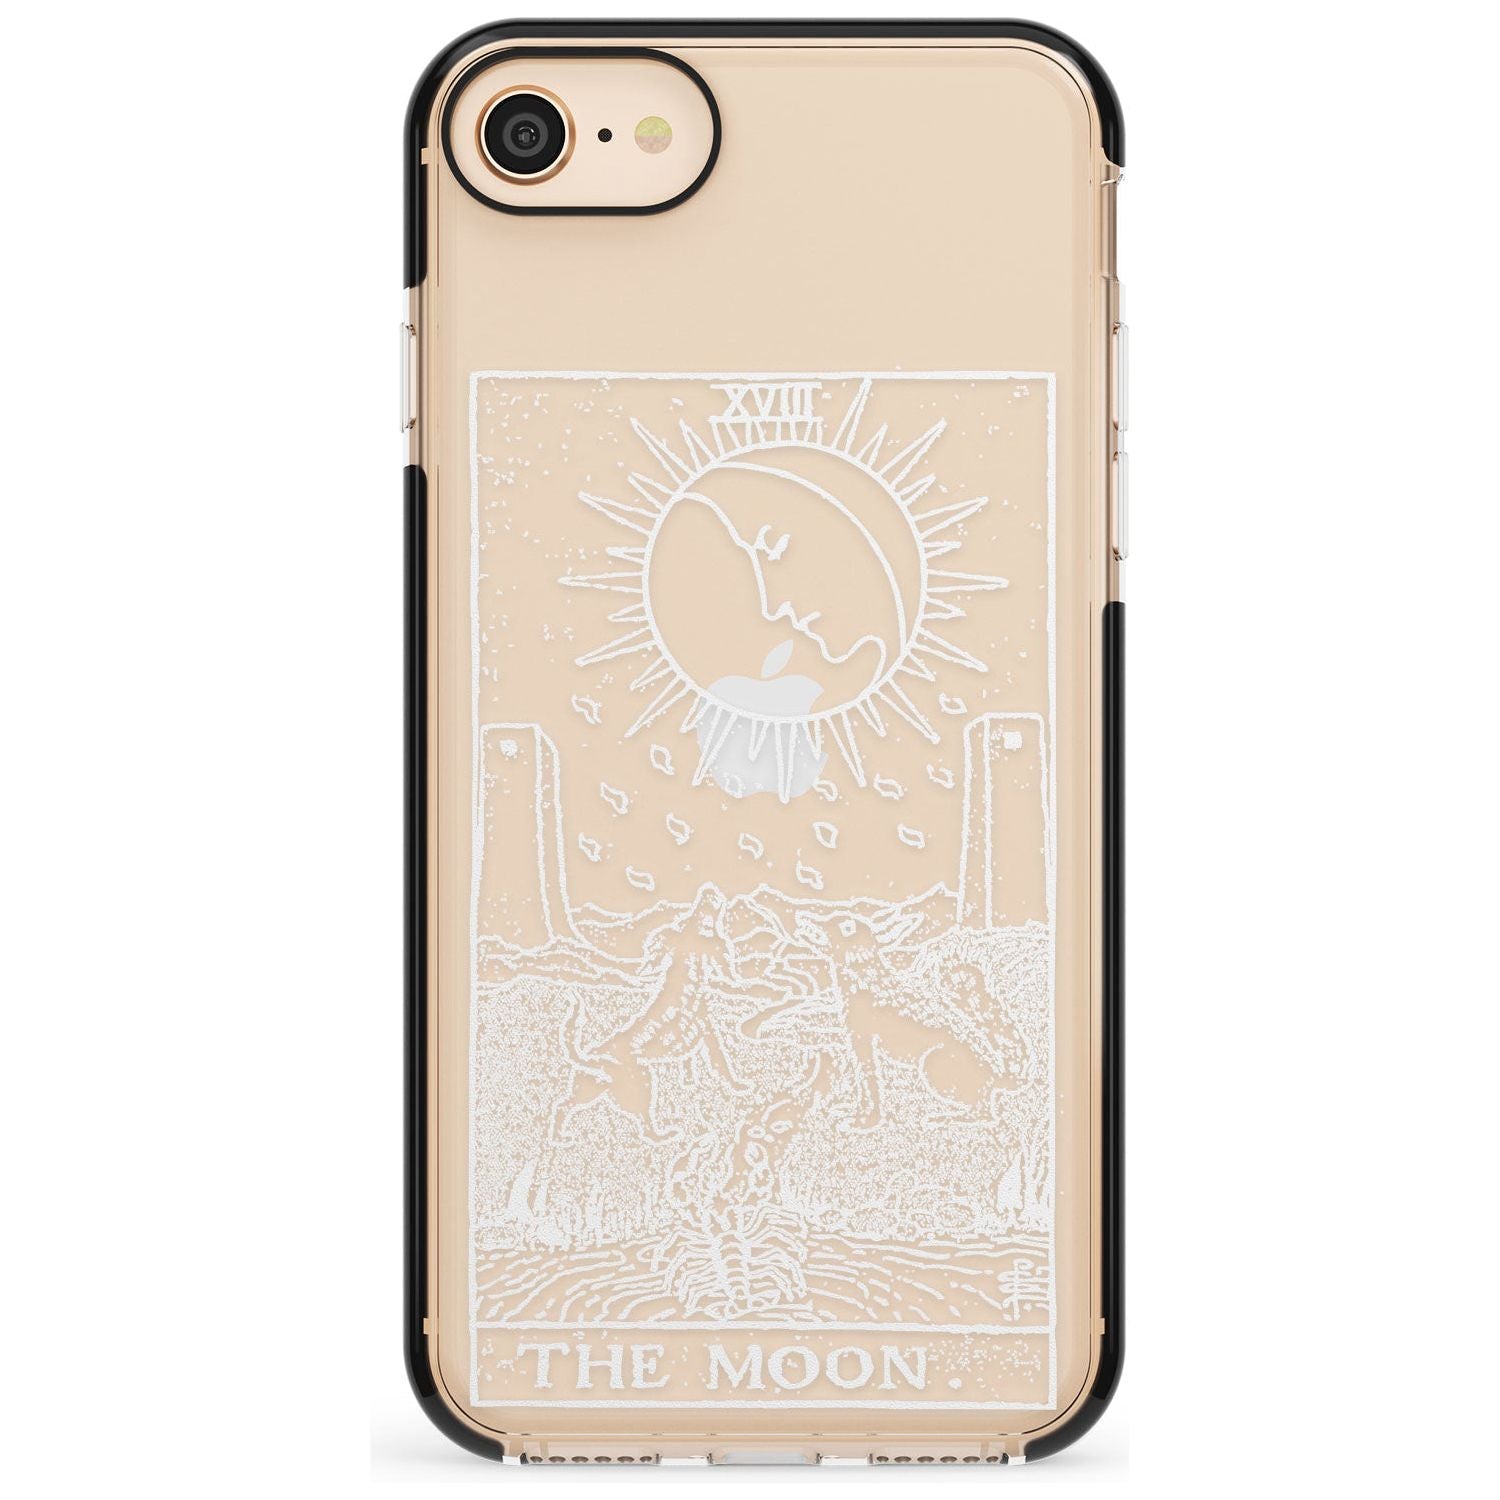 The Moon Tarot Card - White Transparent Pink Fade Impact Phone Case for iPhone SE 8 7 Plus